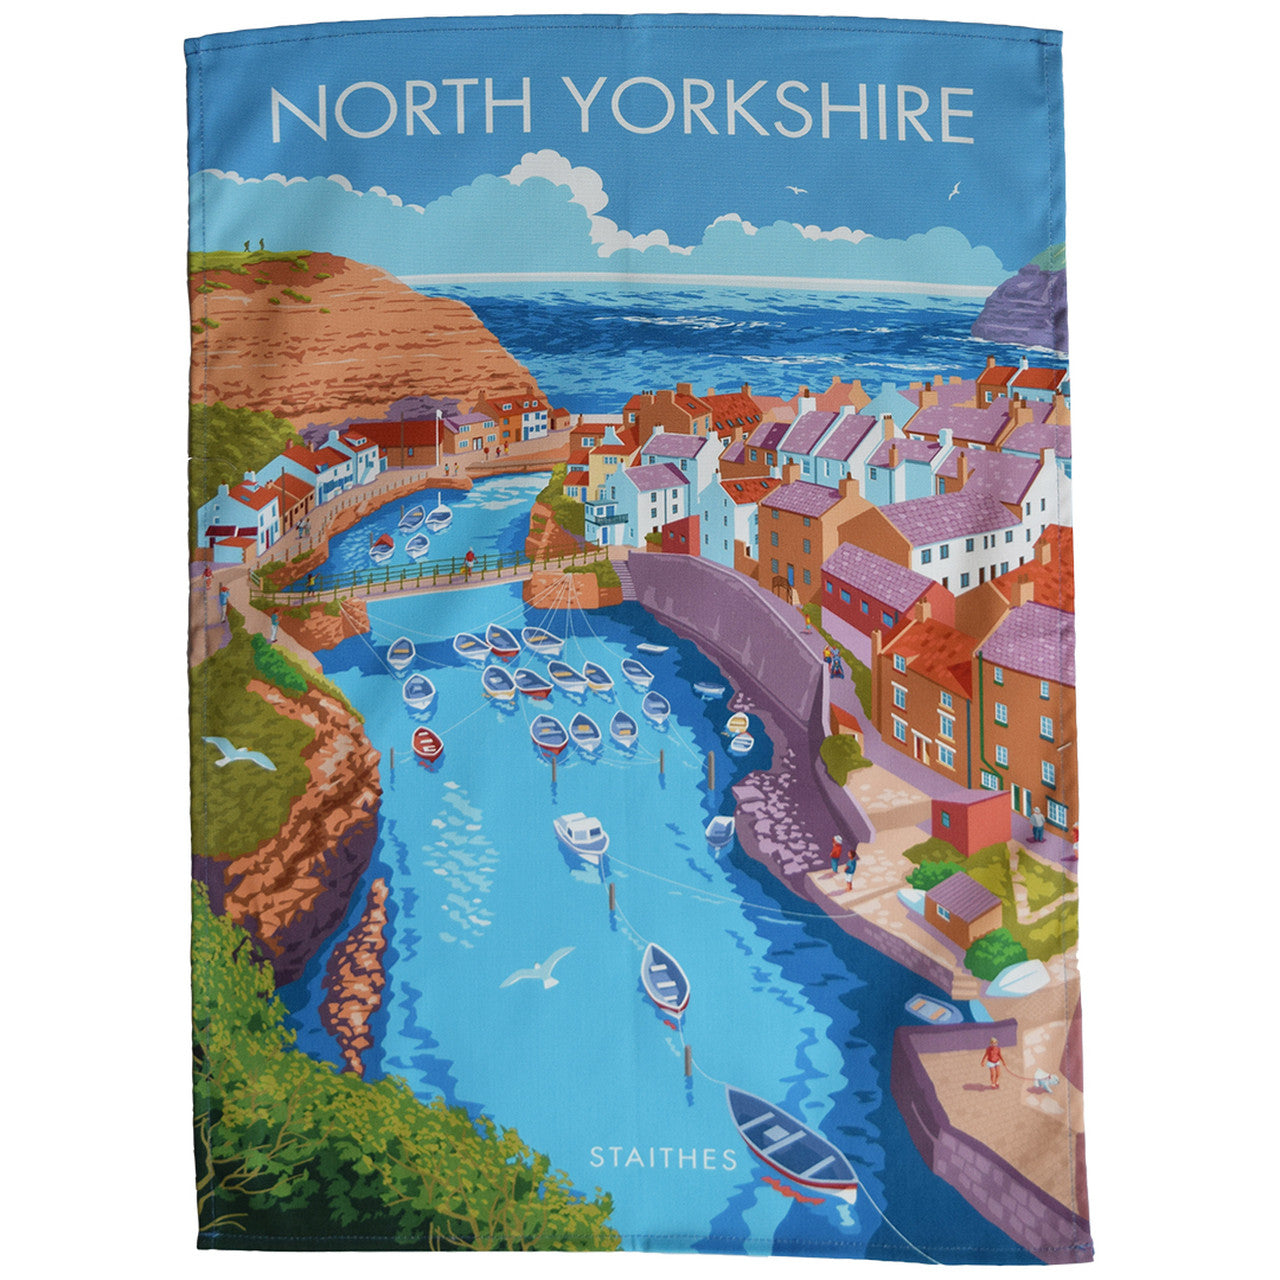 North Yorkshire - Staithes Tea Towel by Town Towels.